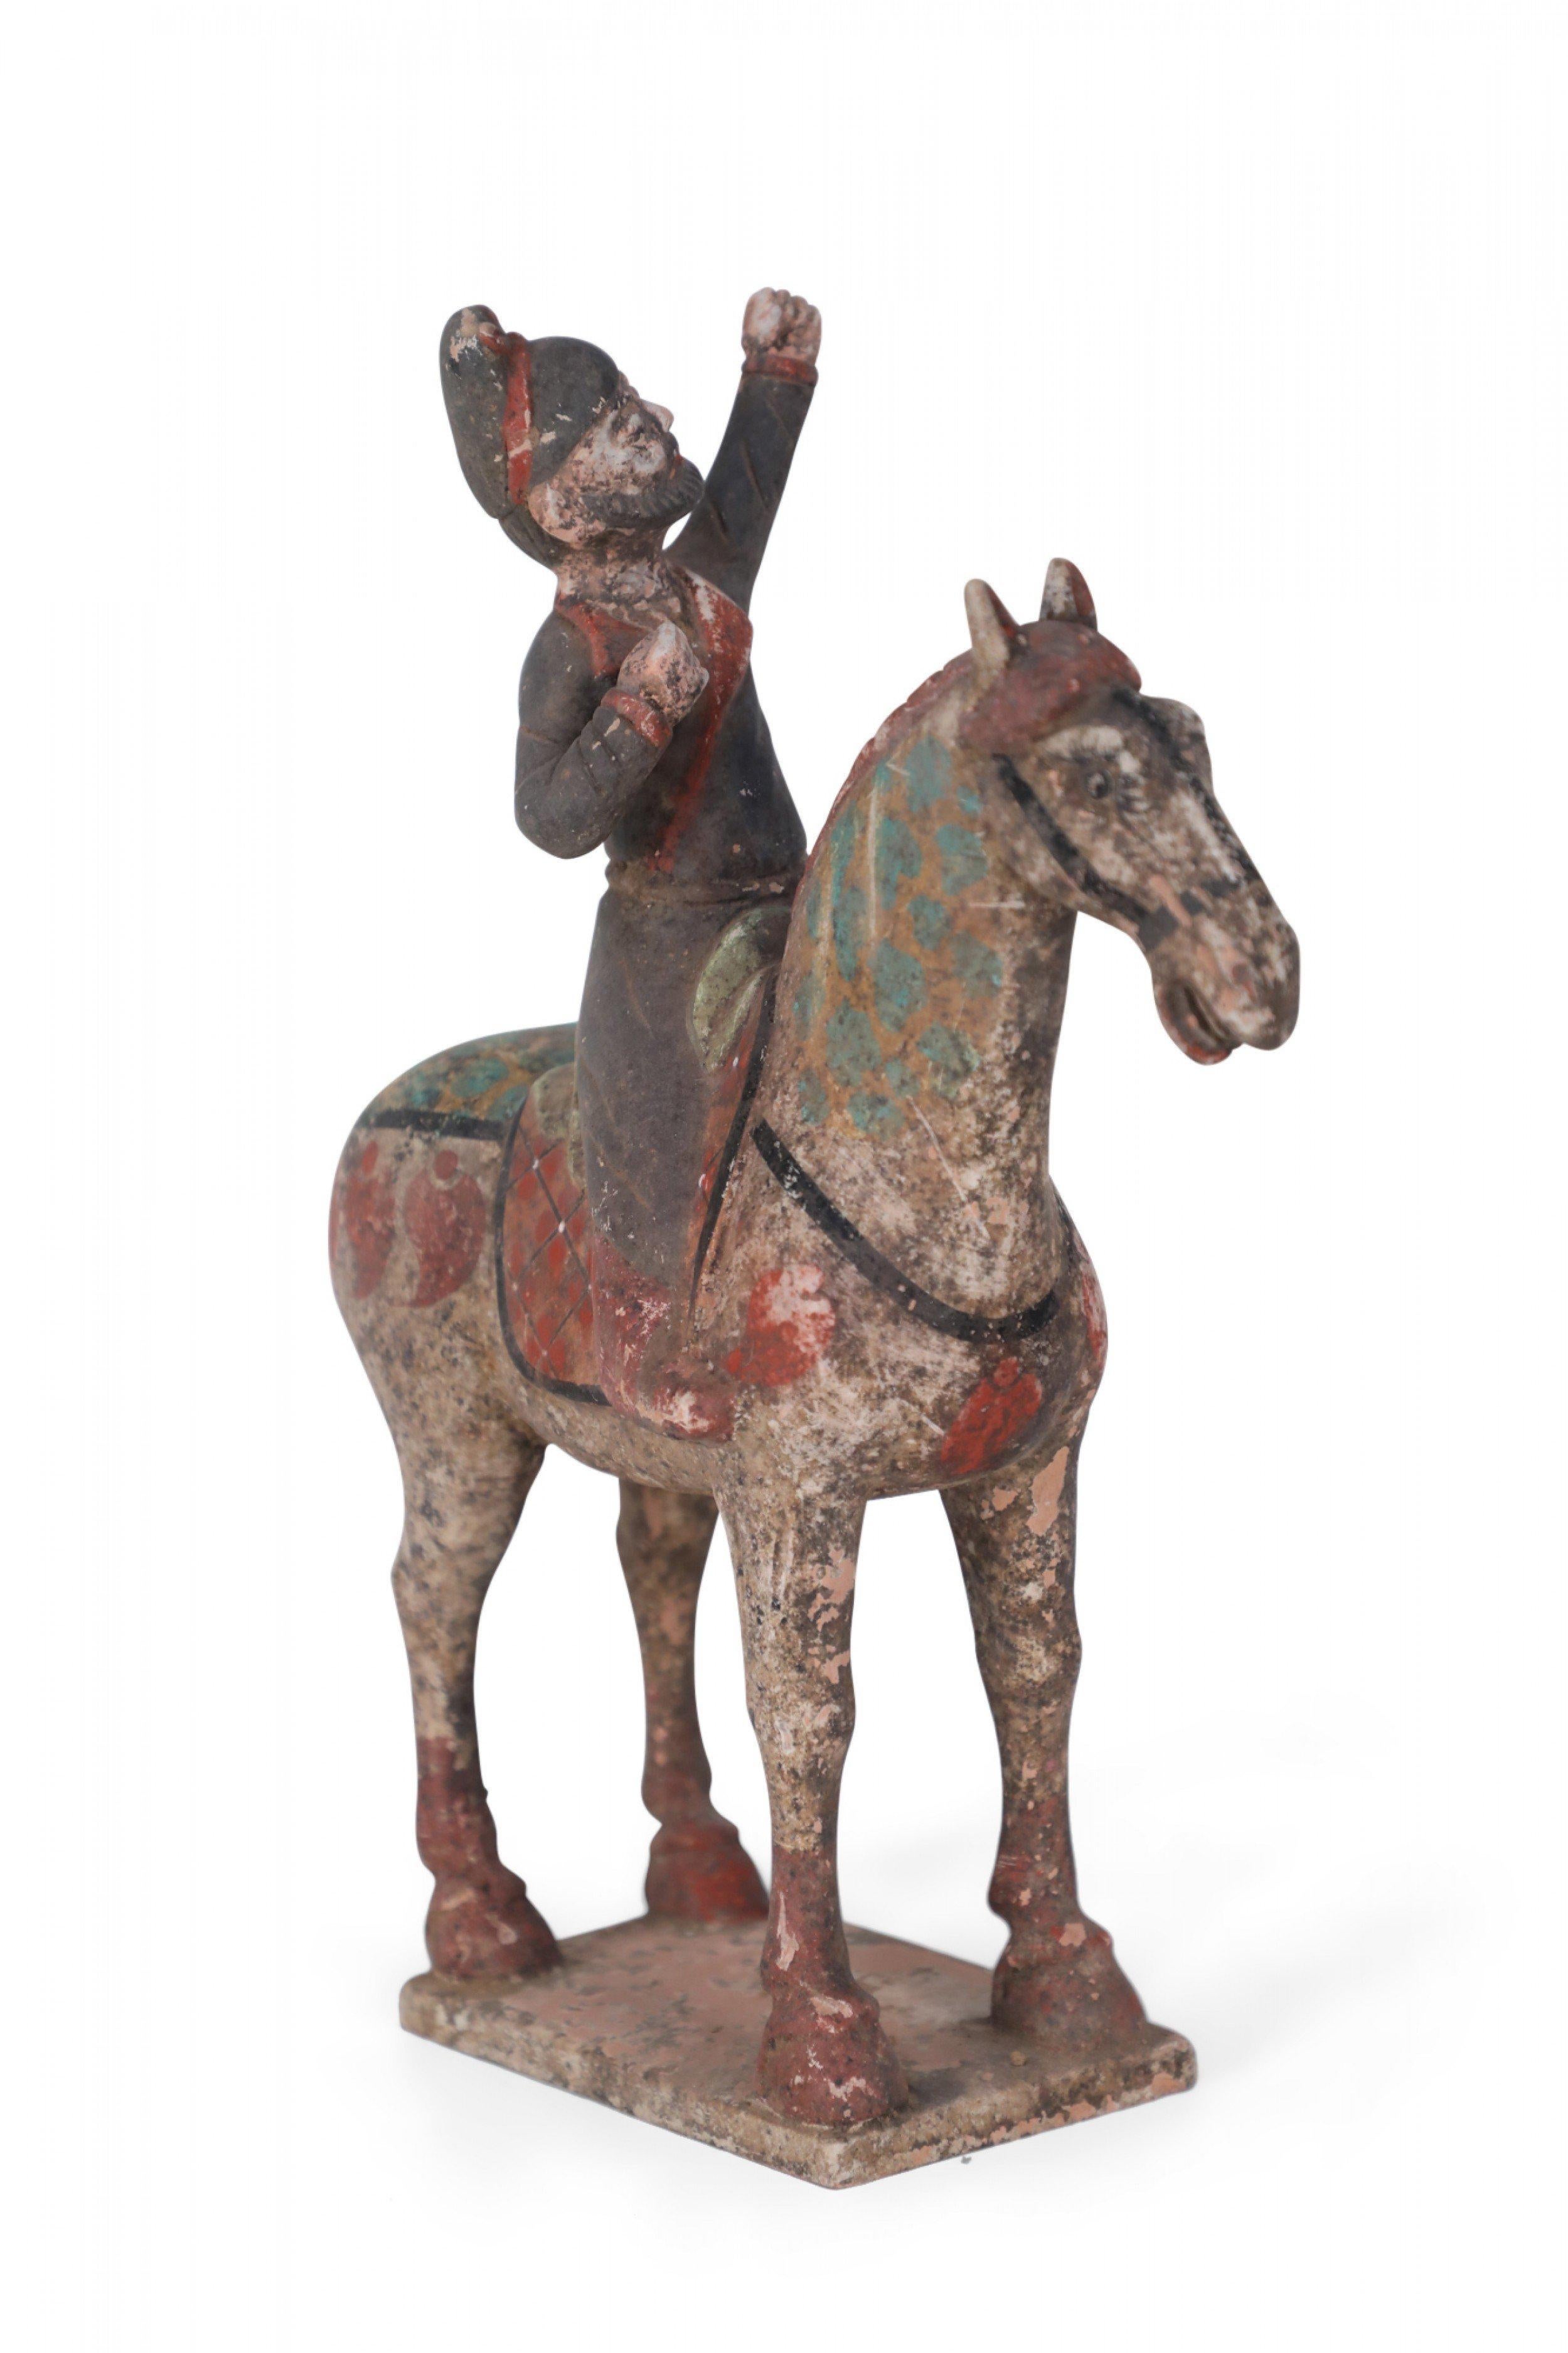 Antique Chinese Tang Dynasty-style terra cotta tomb figure of a man dressed in dark gray robes, with one fist raised in the air, sitting atop a red saddle, on a horse that is painted with blue dots, and standing on a square base.
 